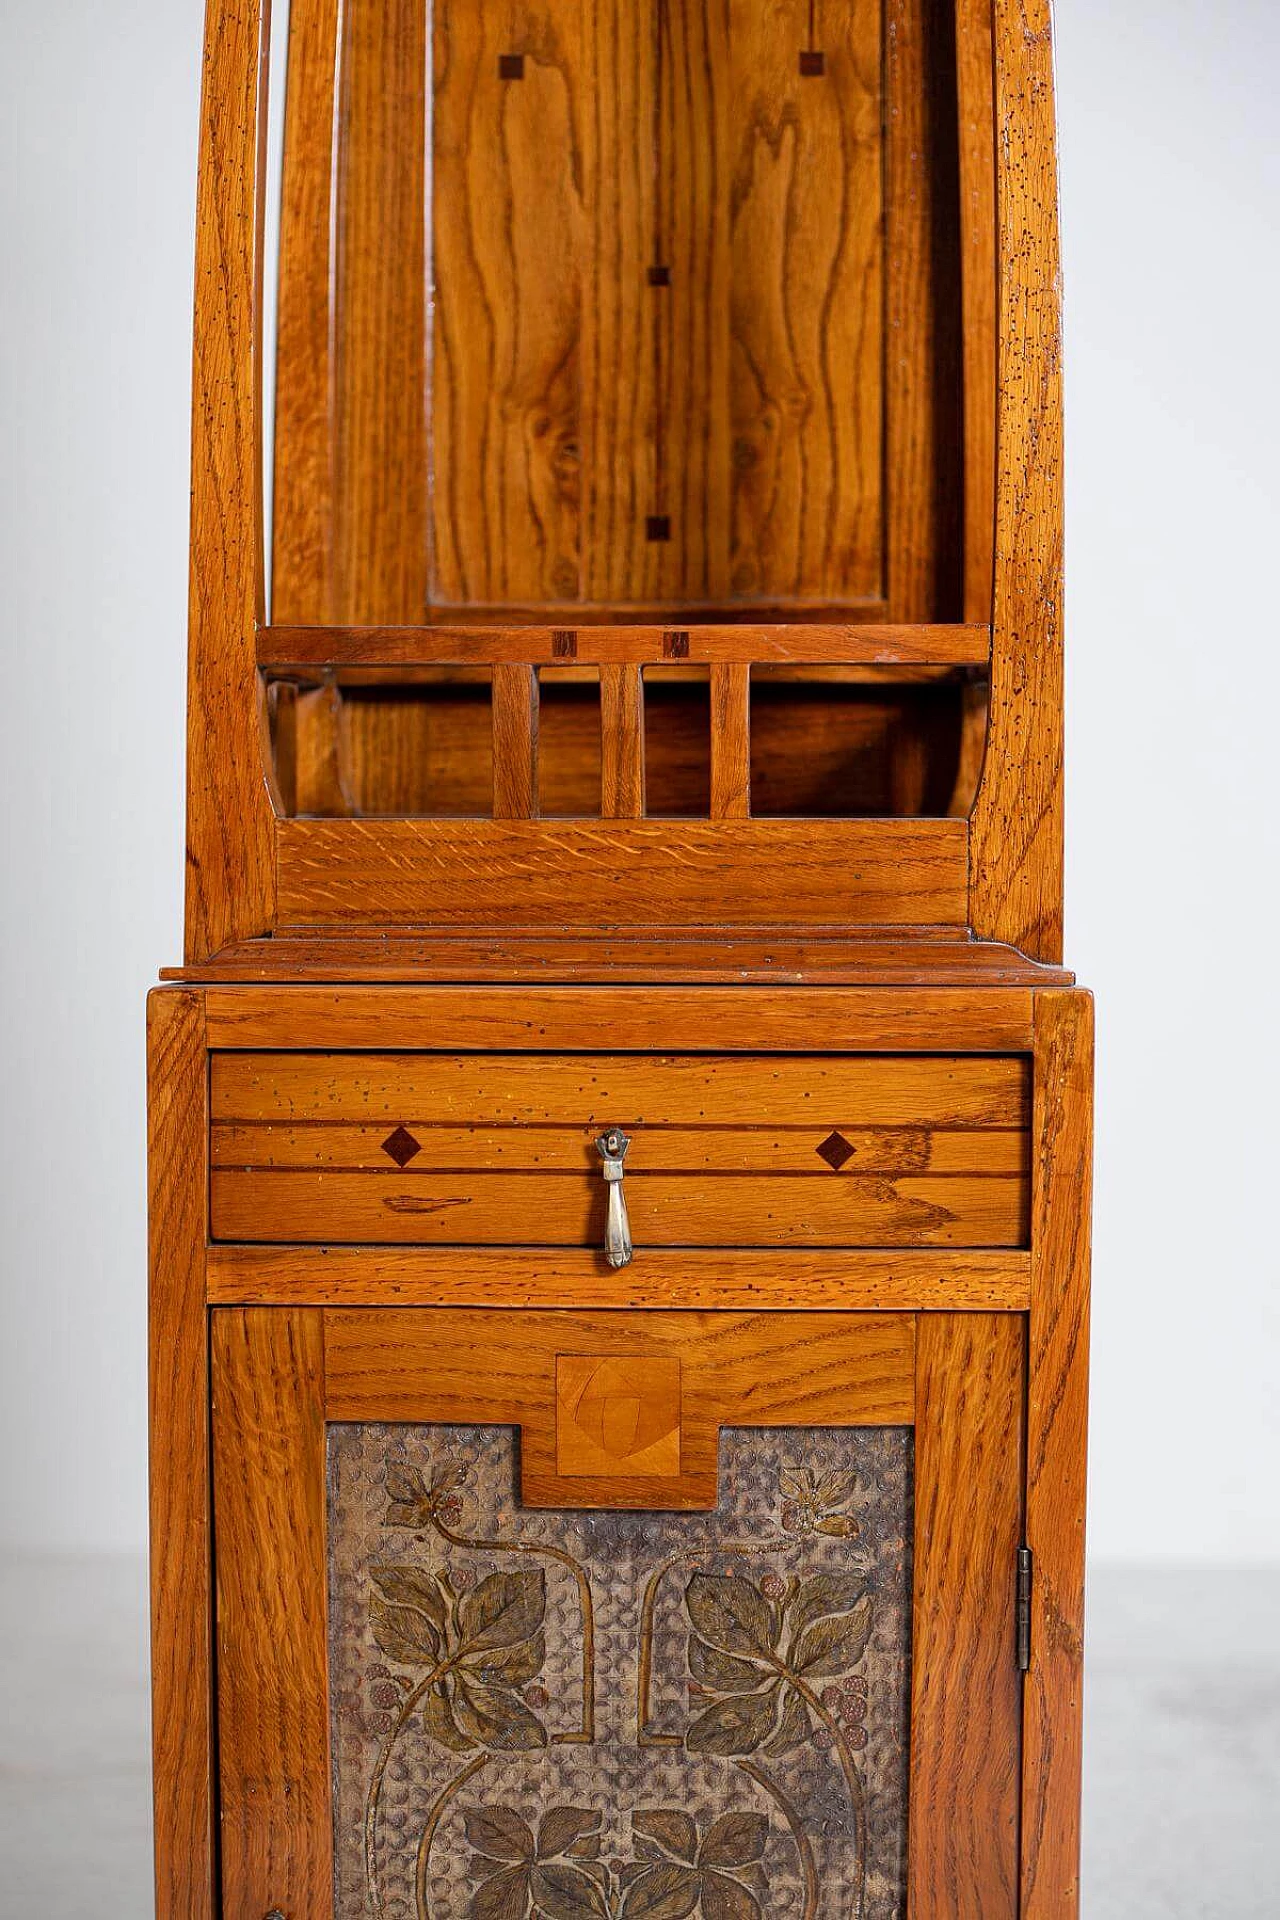 Carved wooden cabinet in Art Nouveau style, 20th century 1403424